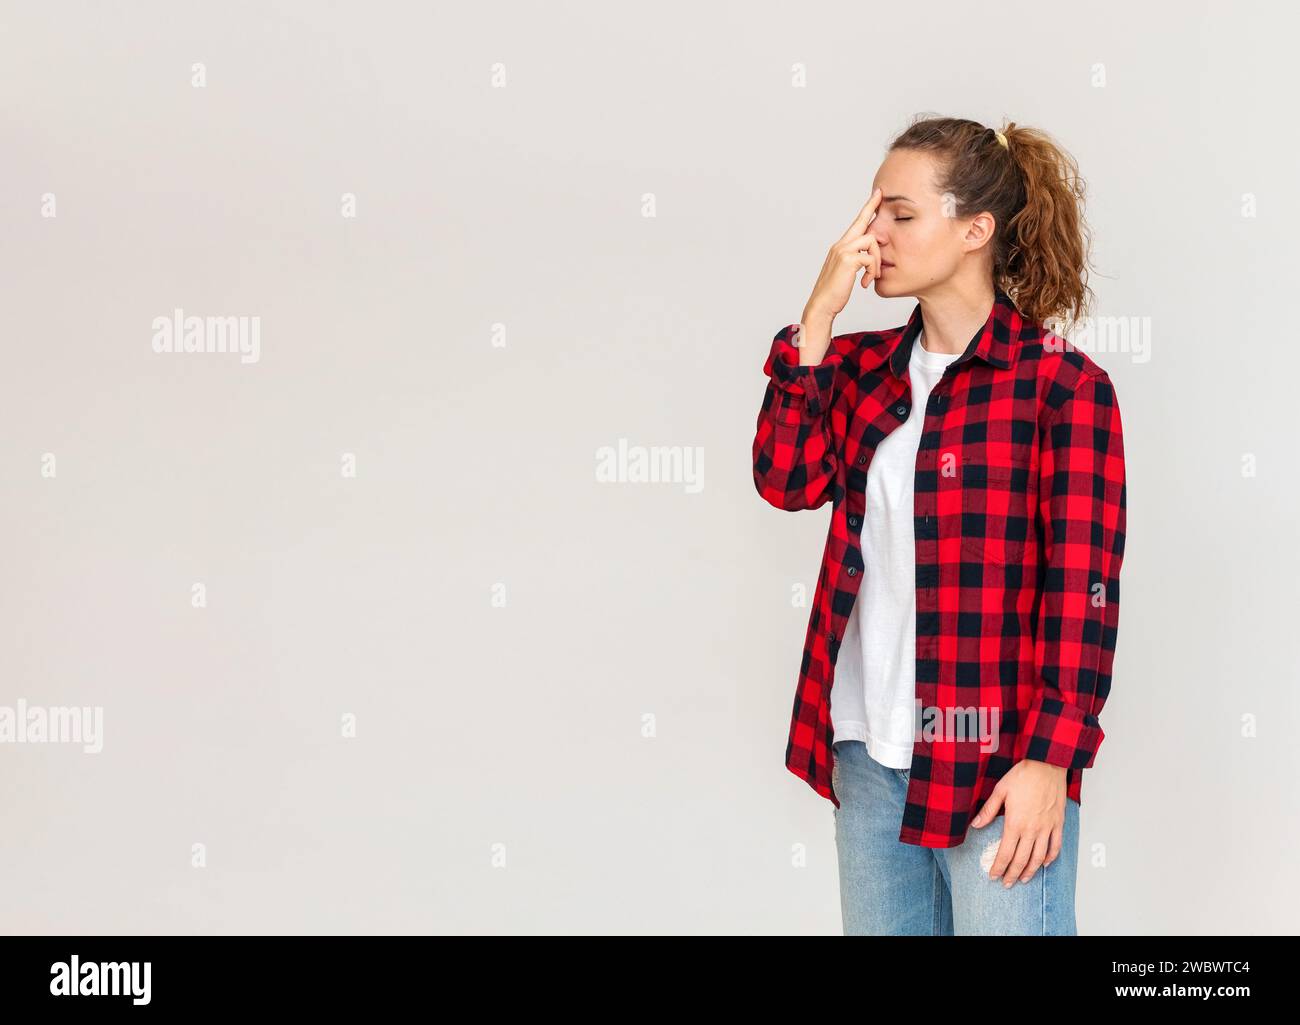 Woman in red shirt stands in front of simple background and doing breathing exercise. Touching bridge of the nose with finger. Coping with stress. Str Stock Photo